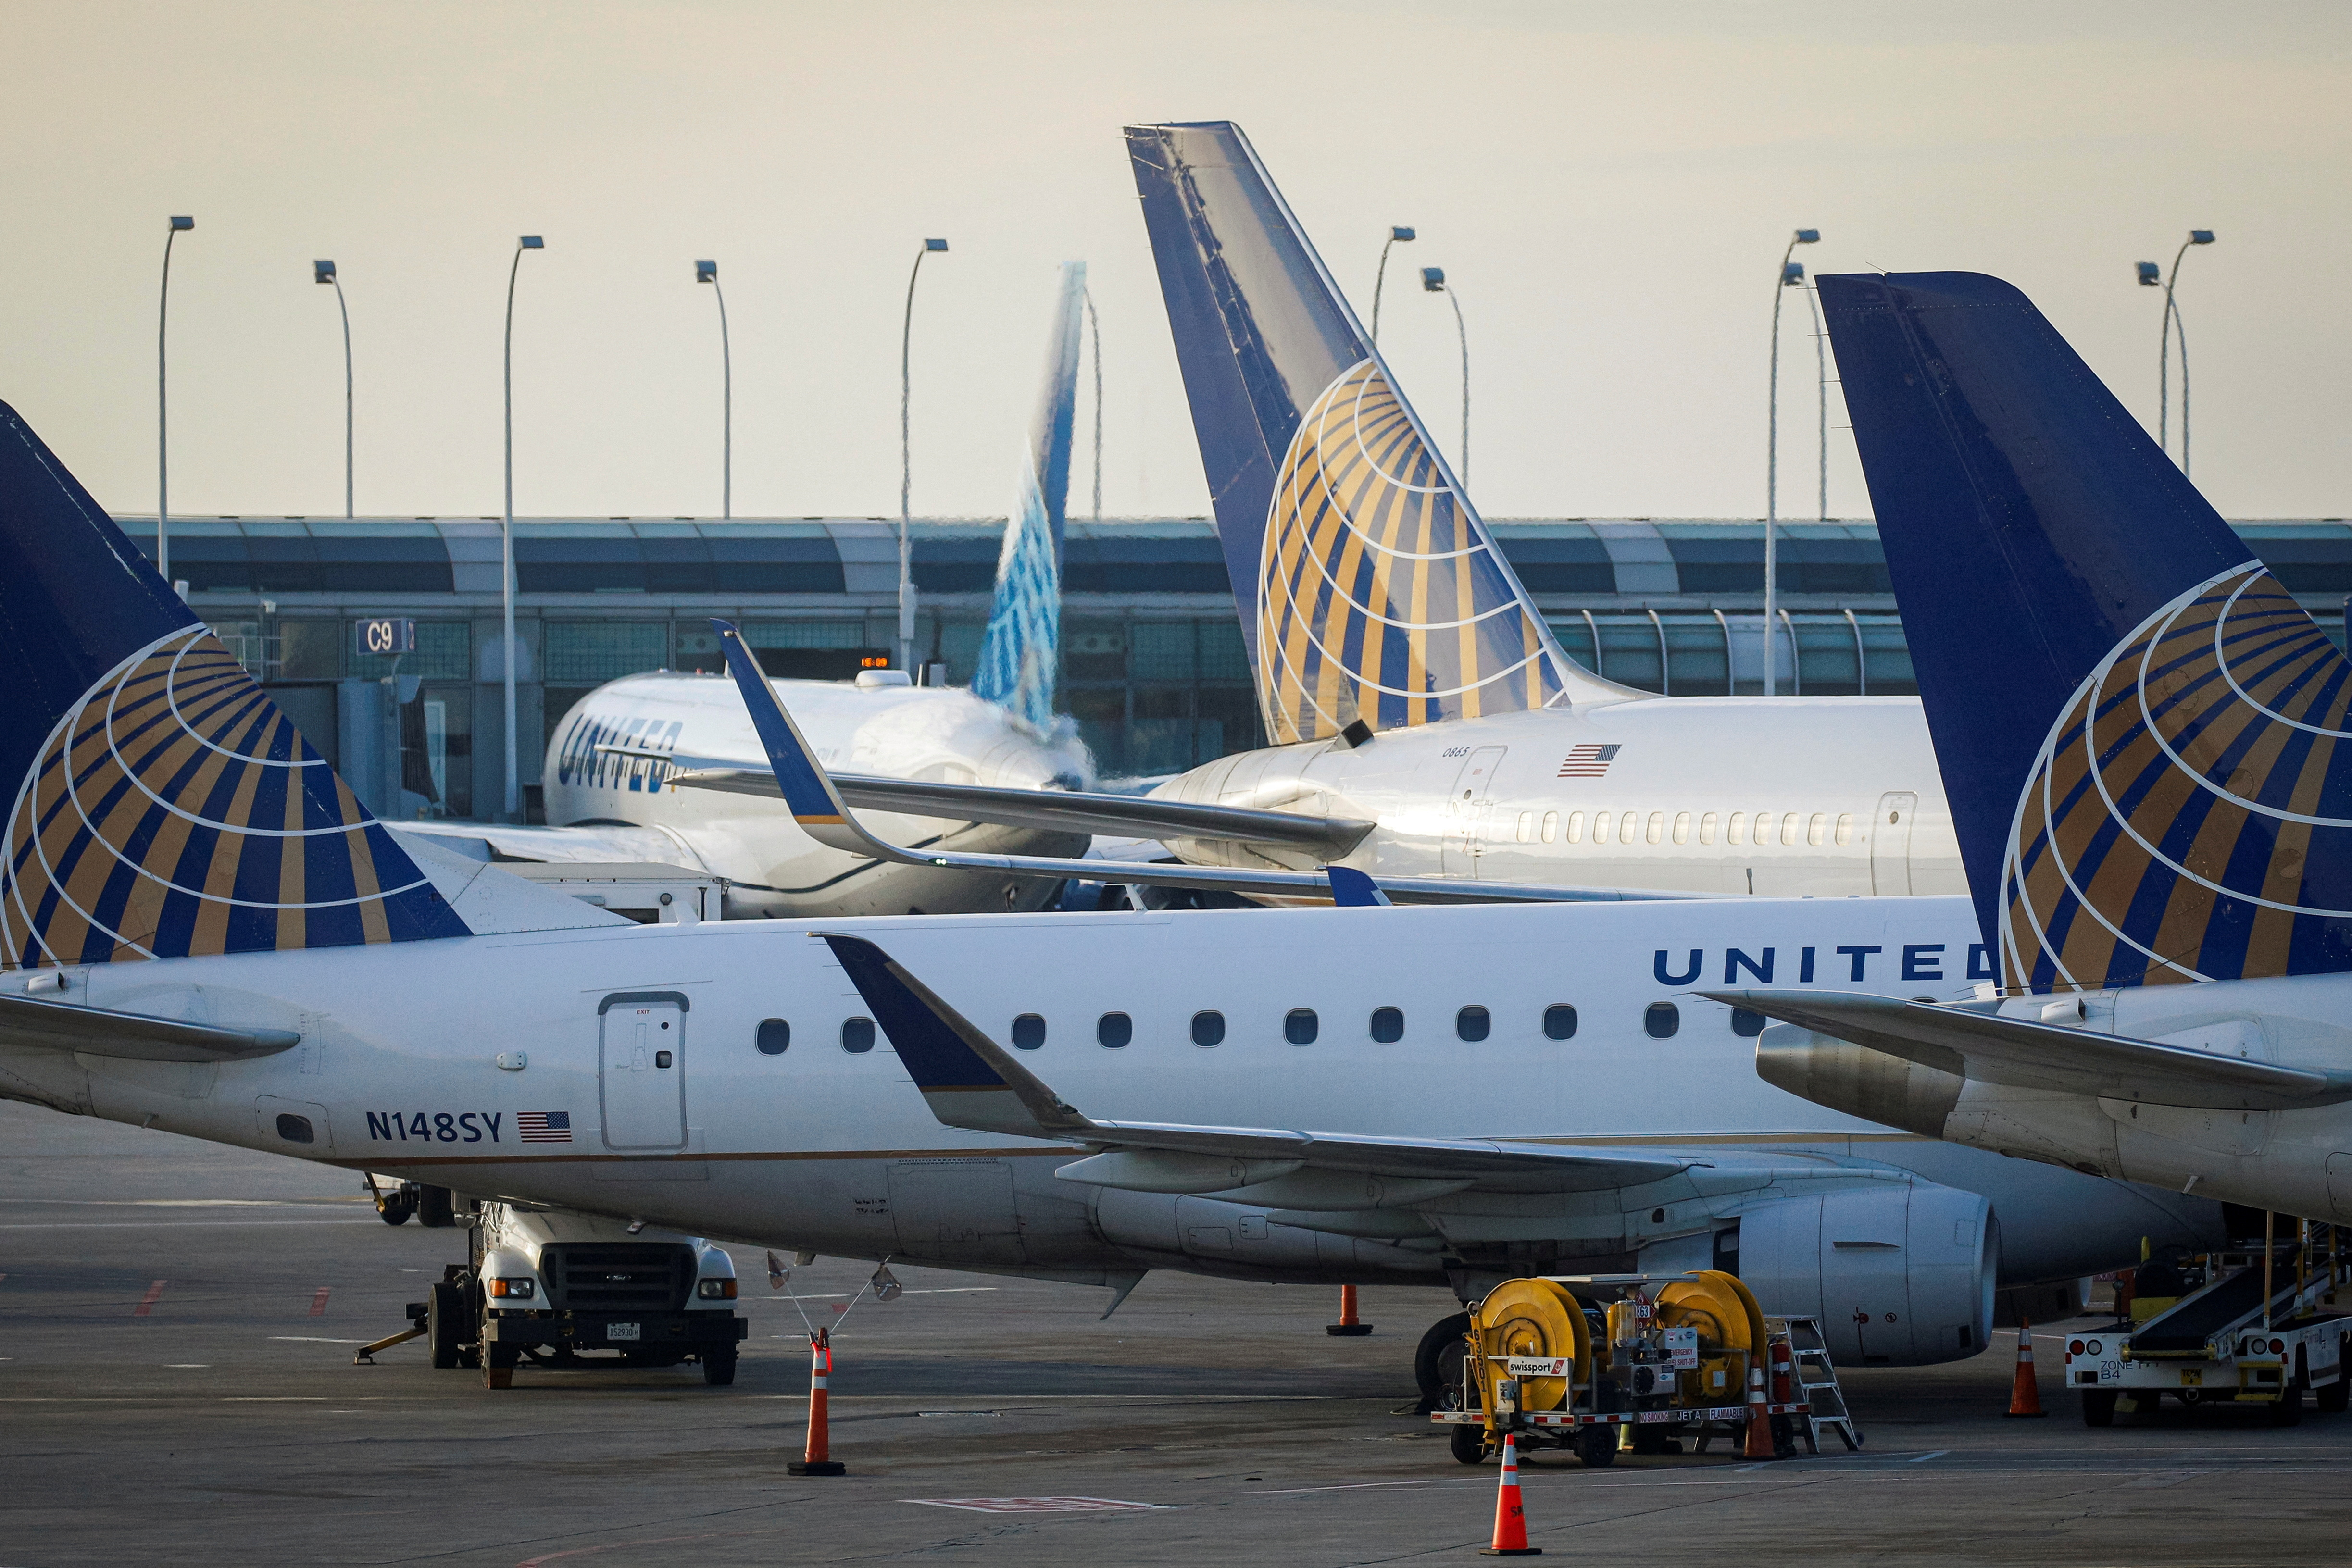 United Airlines planes are parked at their gates at O'Hare International Airport in Chicago, Illinois